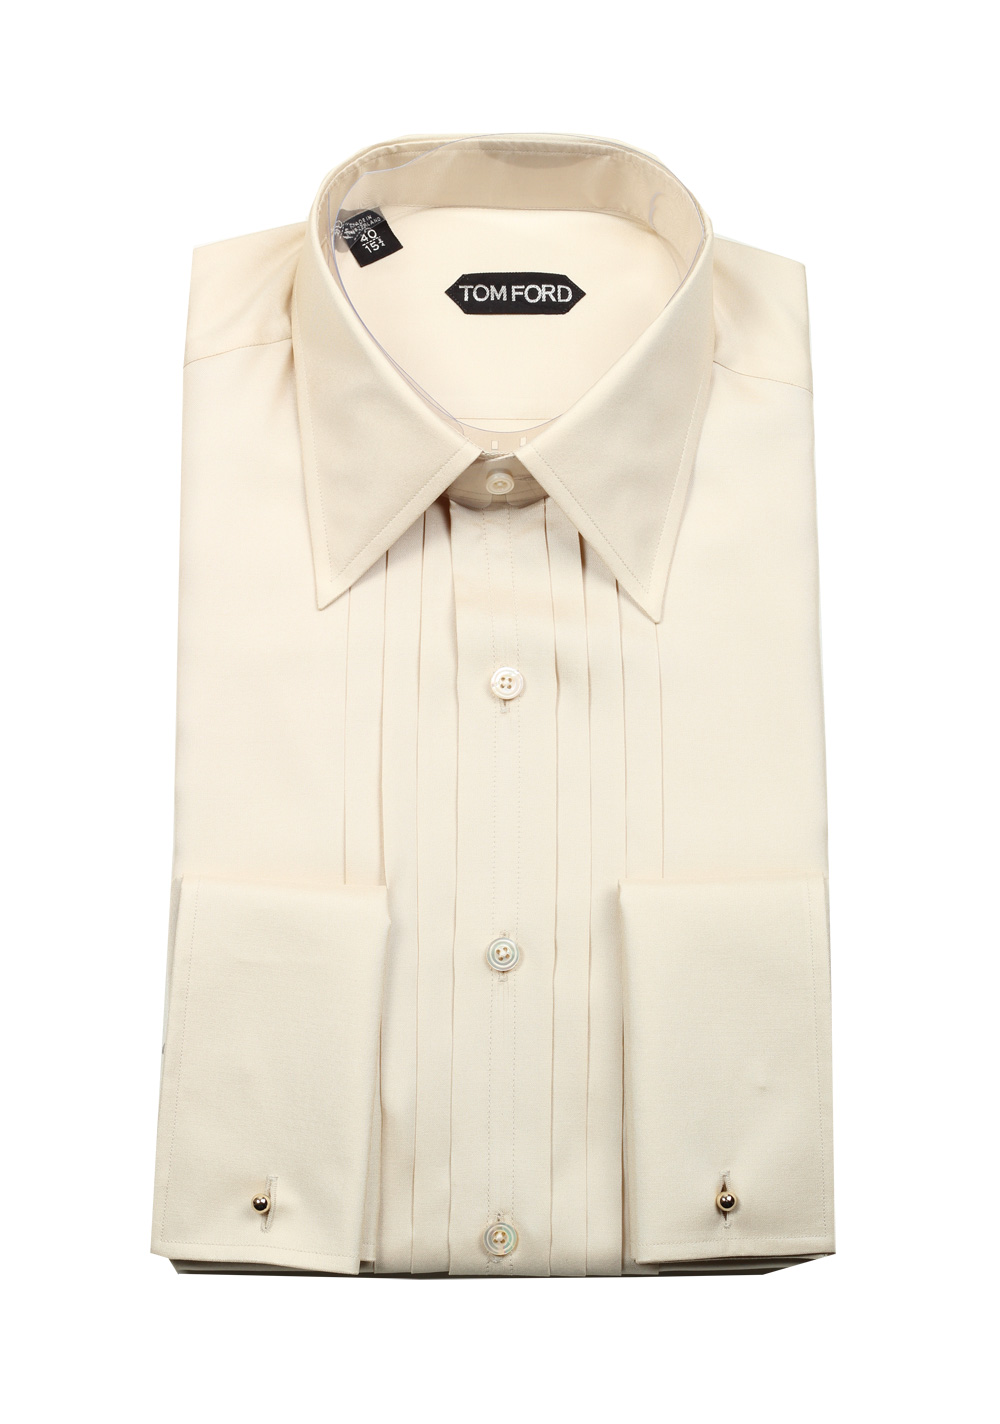 TOM FORD Solid Off White Charmeuse Evening Tuxedo Shirt Size 40 / 15,75 U.S. | Costume Limité